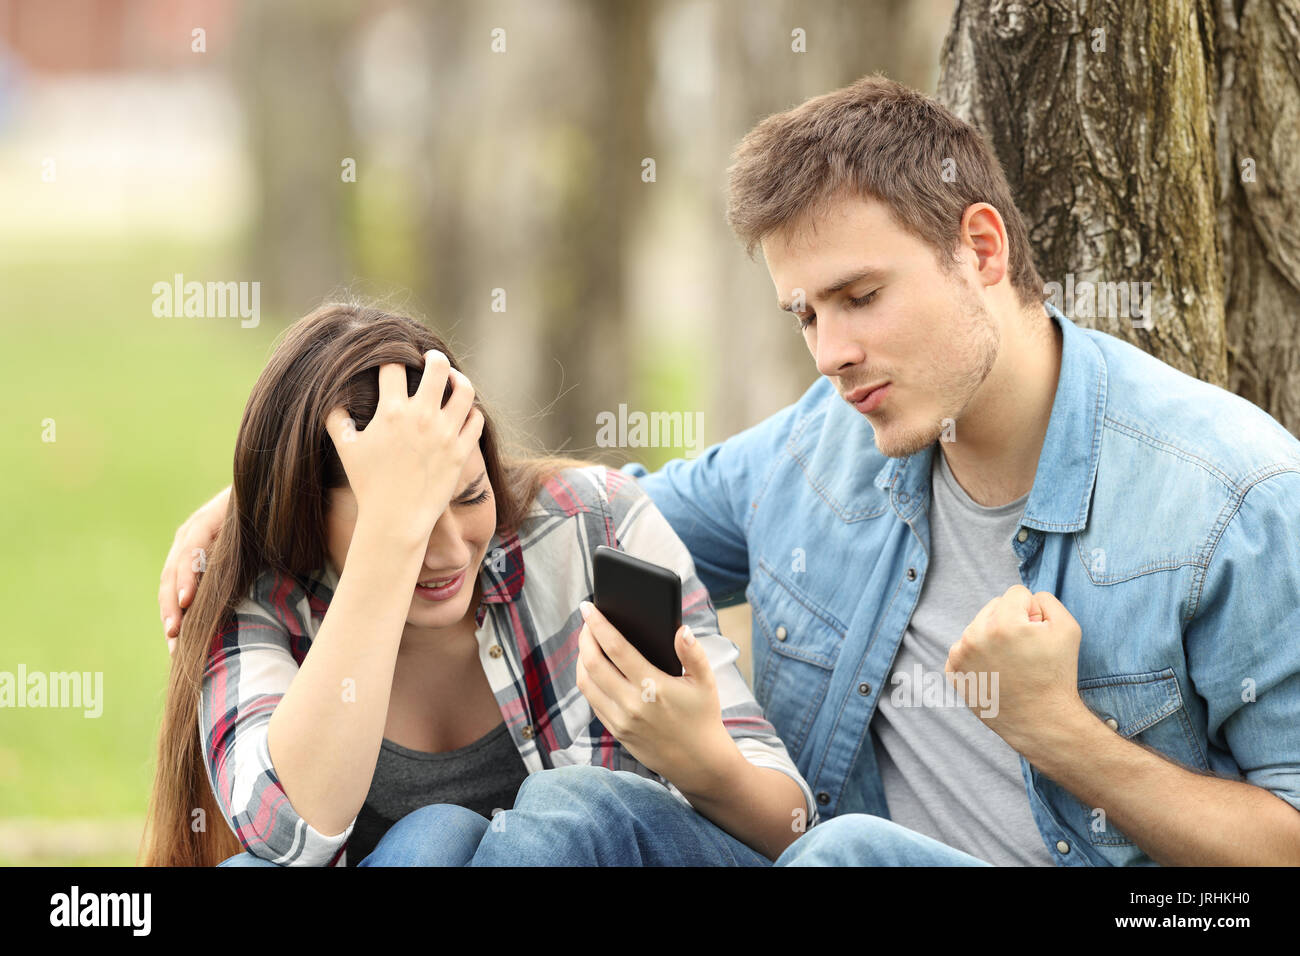 Happy boy celebrating that his sad friend is breaking up by chat sitting on the grass in a park Stock Photo